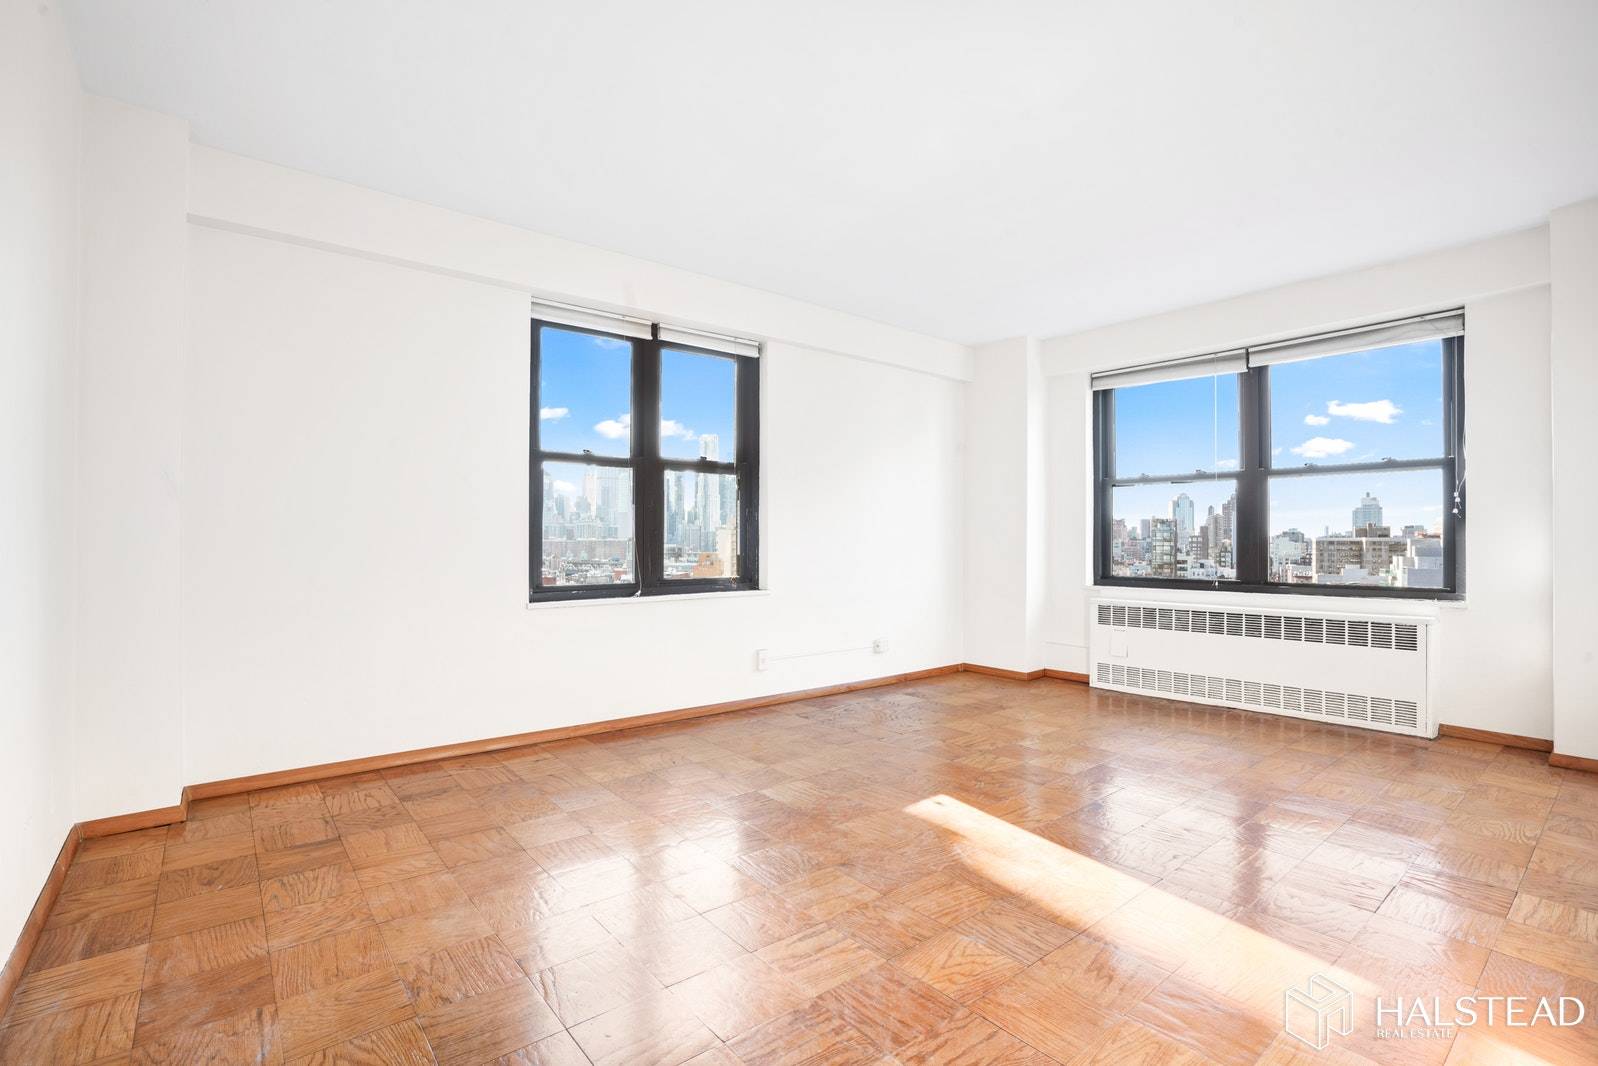 EASY TO SHOW VIA VIDEO, FACETIME OR LEAVING DOOR UNLOCKED FOR A PRIVATE, IN PERSON SHOWINGWide open views over Seward Park towards the downtown skyline !